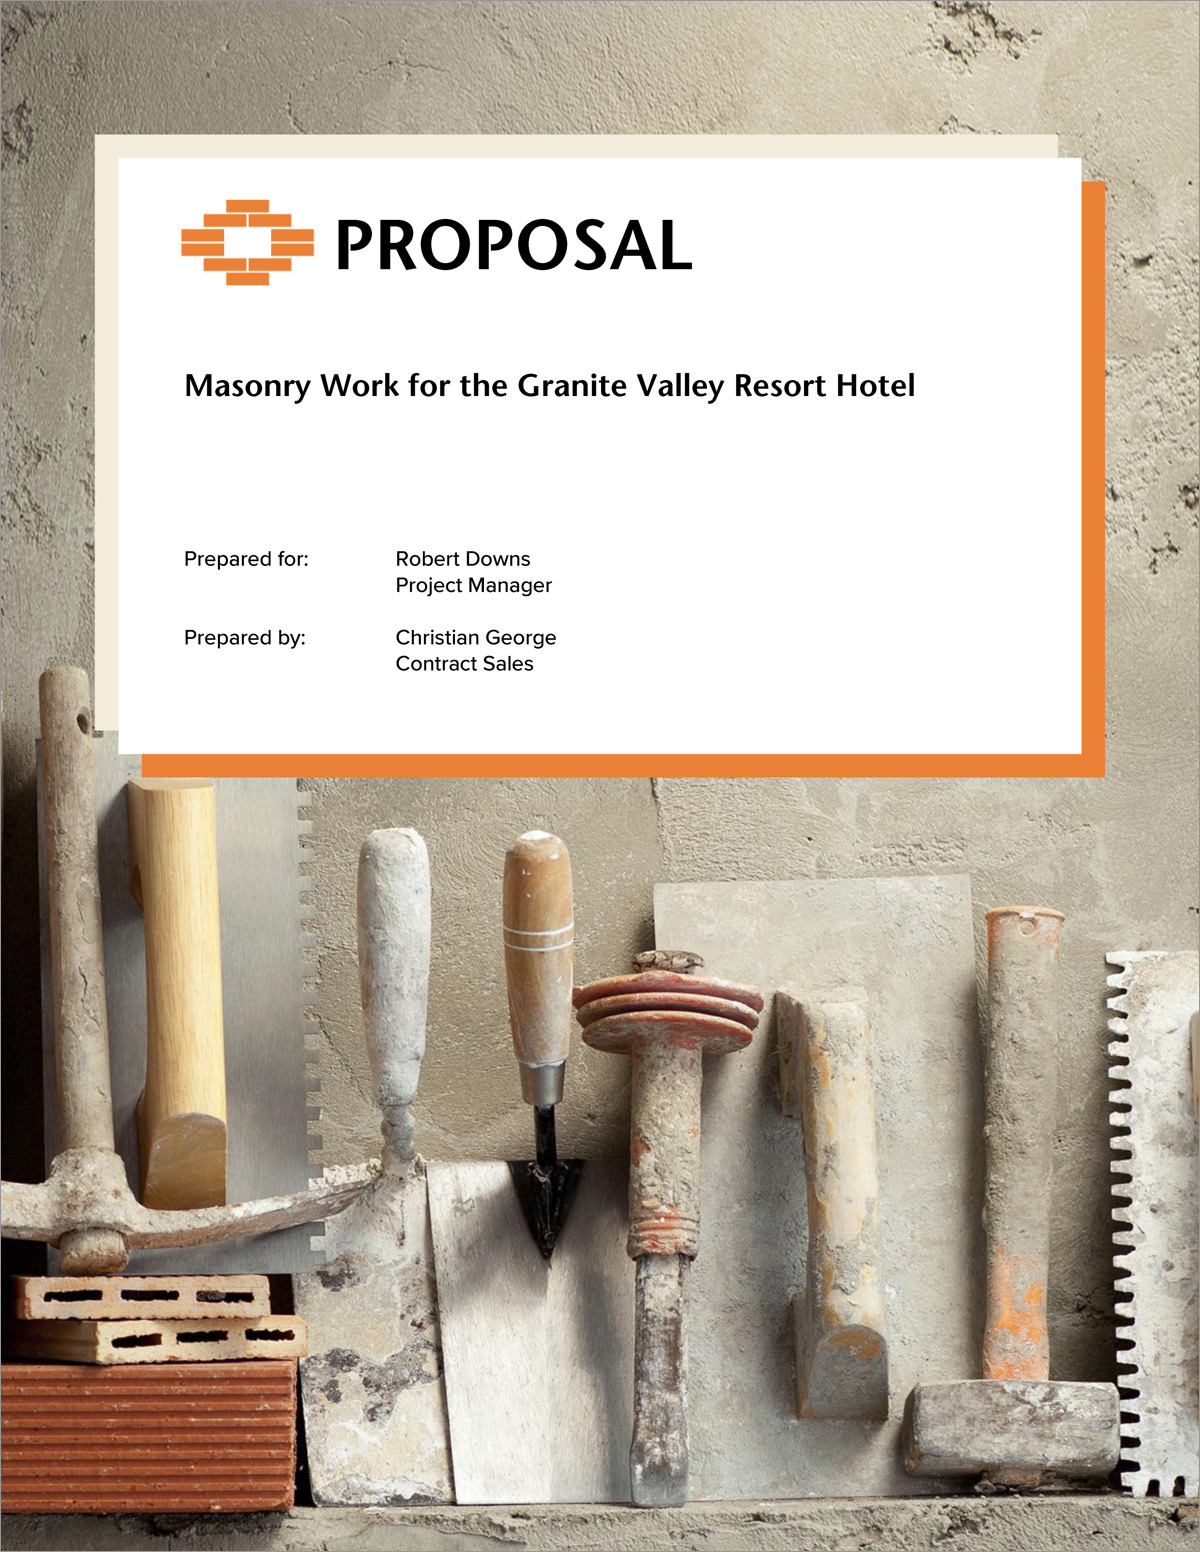 Masonry Contracting Services Sample Proposal 5 Steps